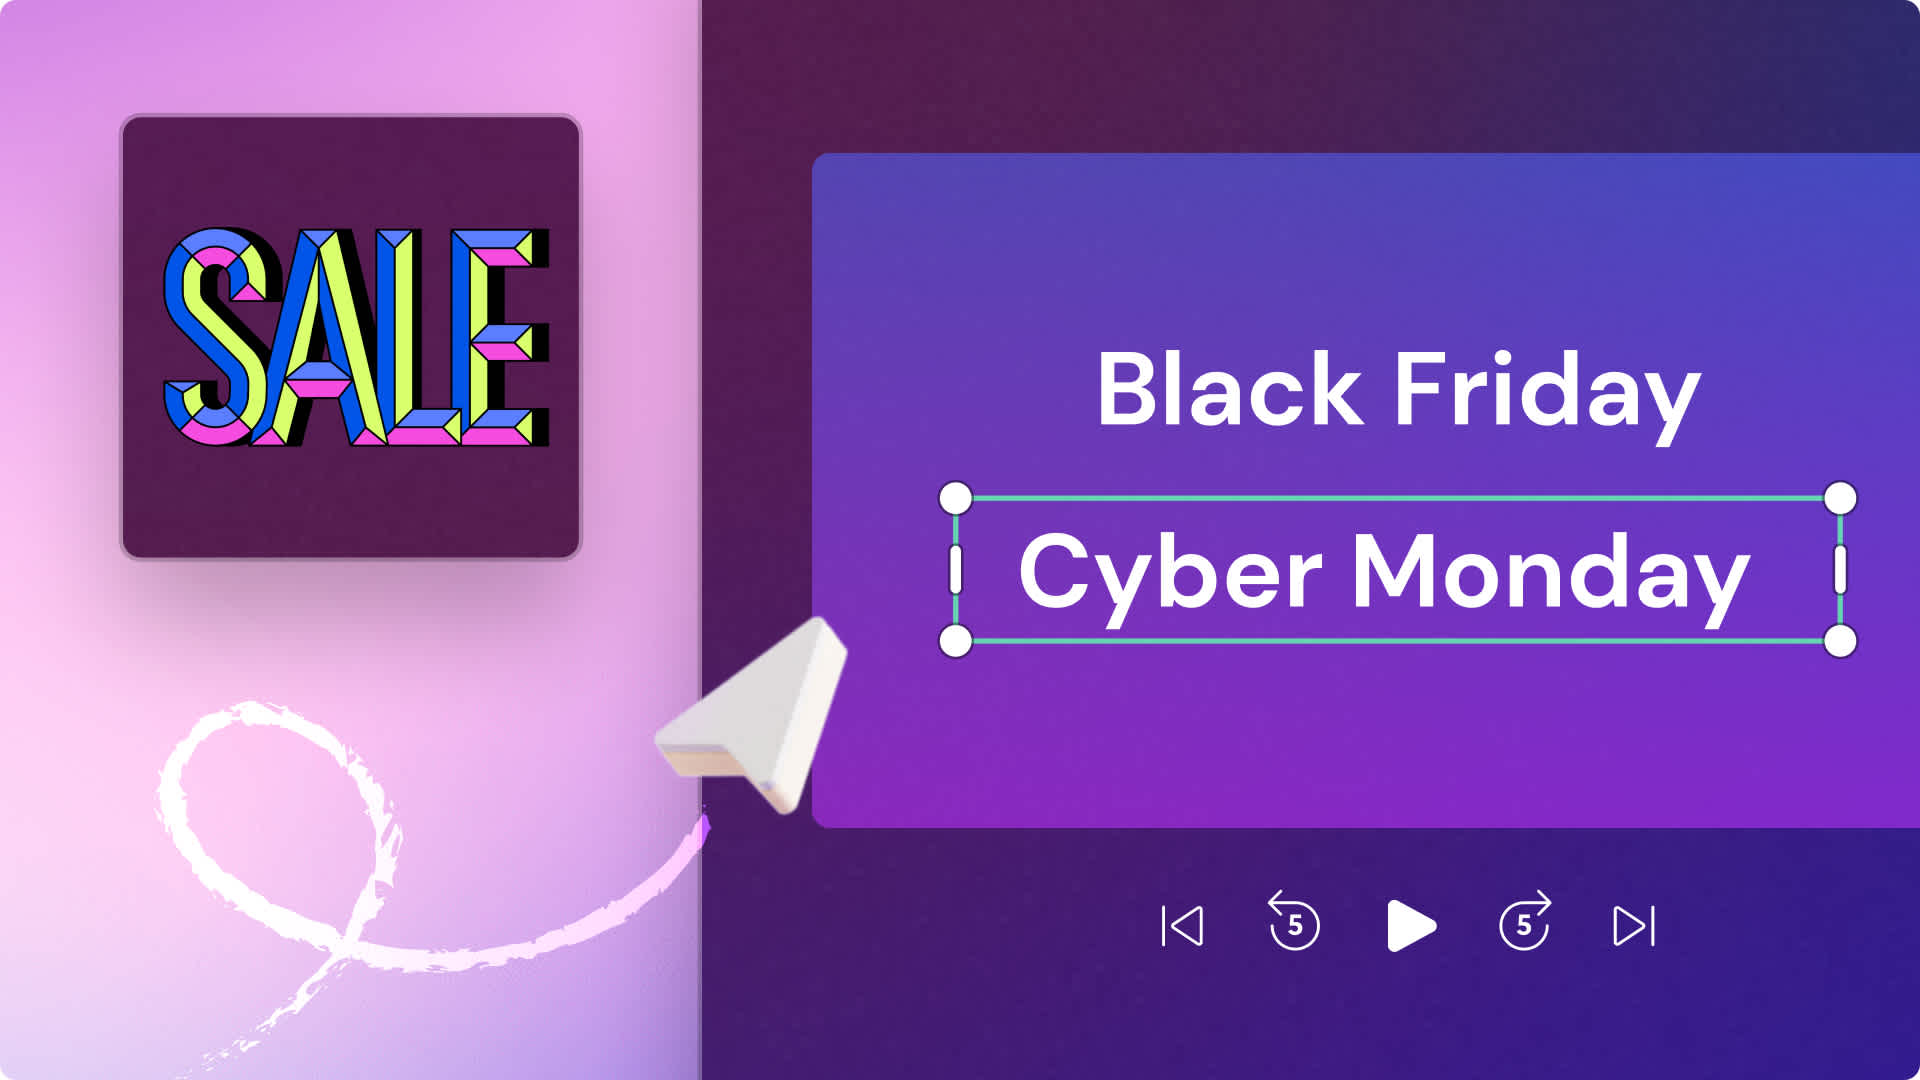 Black Friday and Cyber Monday thumbnail